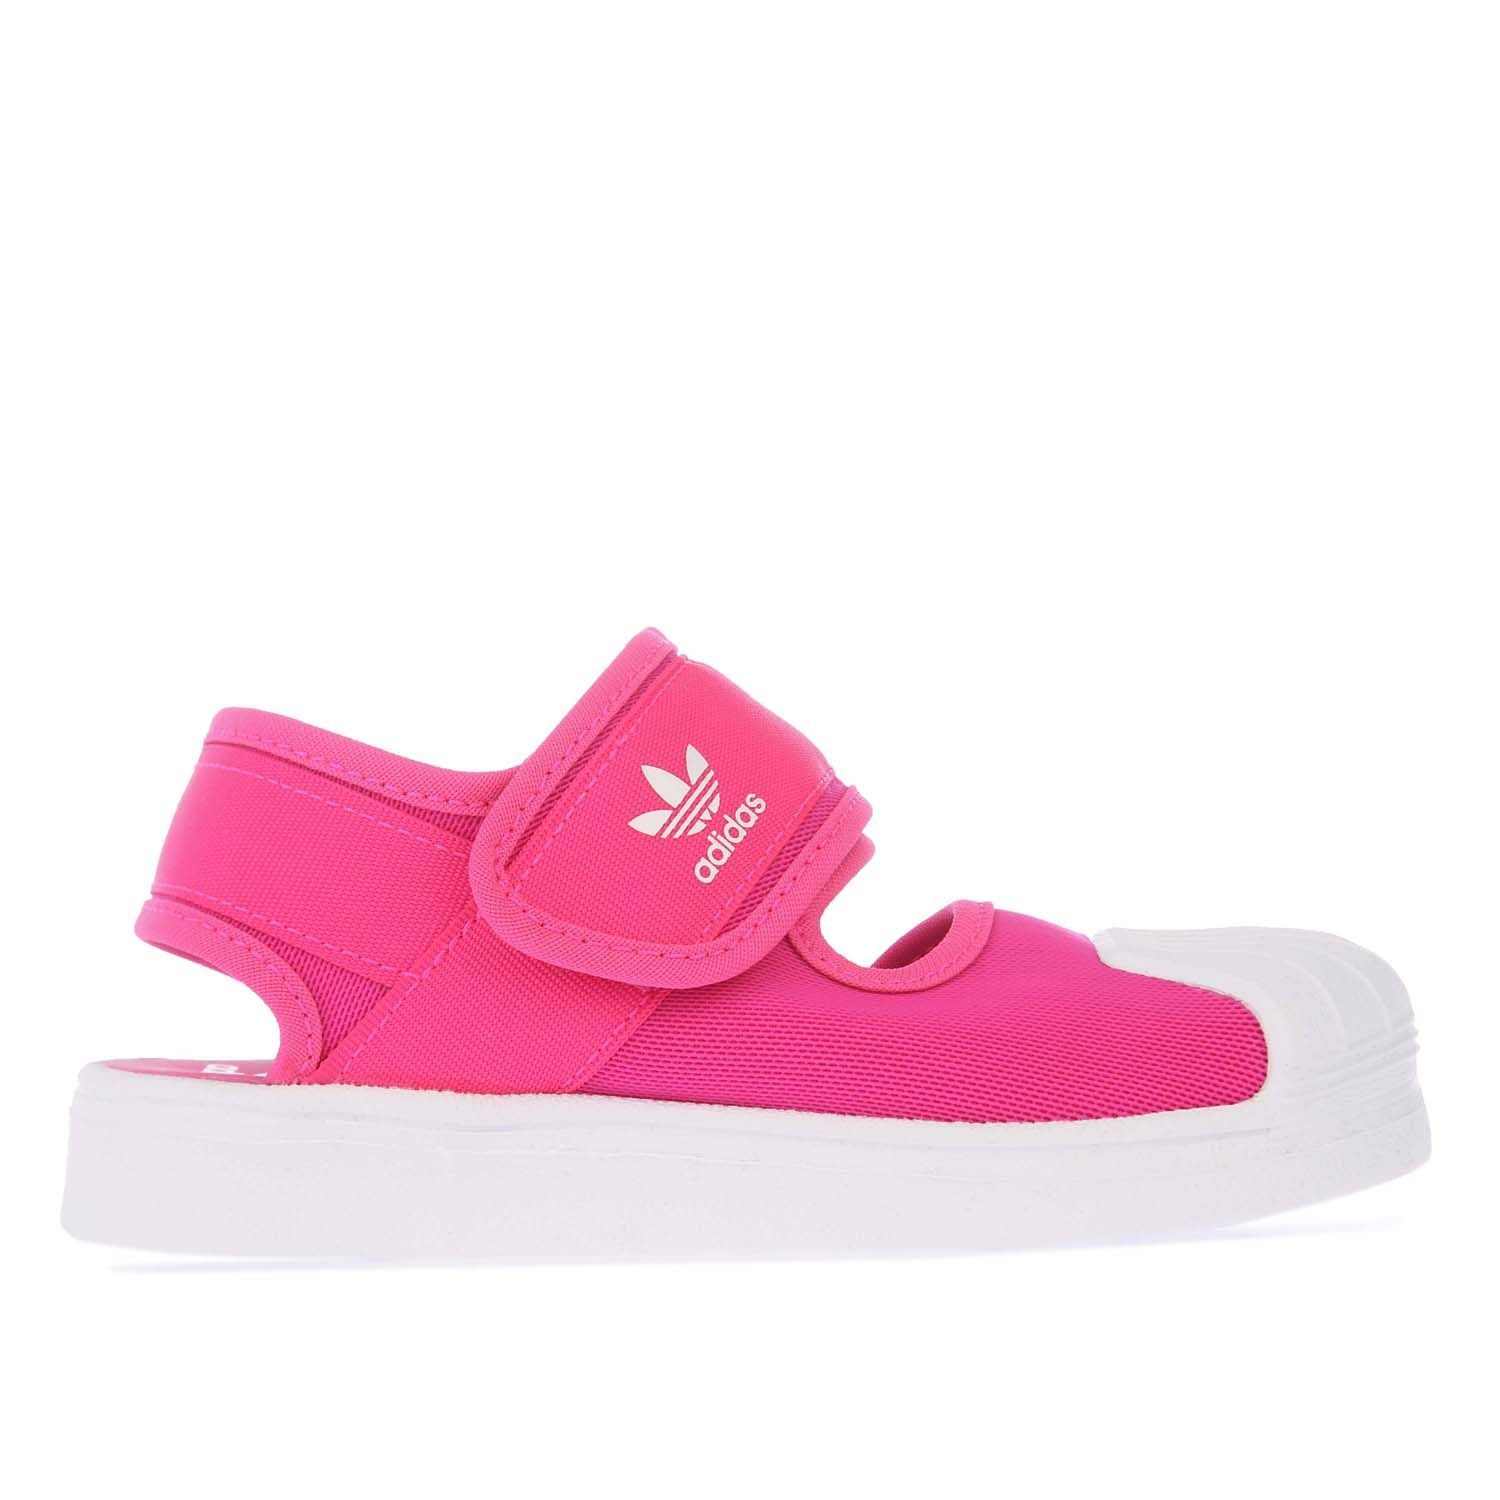 Childrens adidas Originals Superstar 360 Sandals in pink white.- Open mesh upper.- Hook-and-loop strap closure.- Adjustable strap.- Lightly cushioned footbed.- EVA outsole.- Rubber sole and shell toe.- Textile and Synthetic upper  Textile lining  Synthetic sole.- Ref.: FV7585C